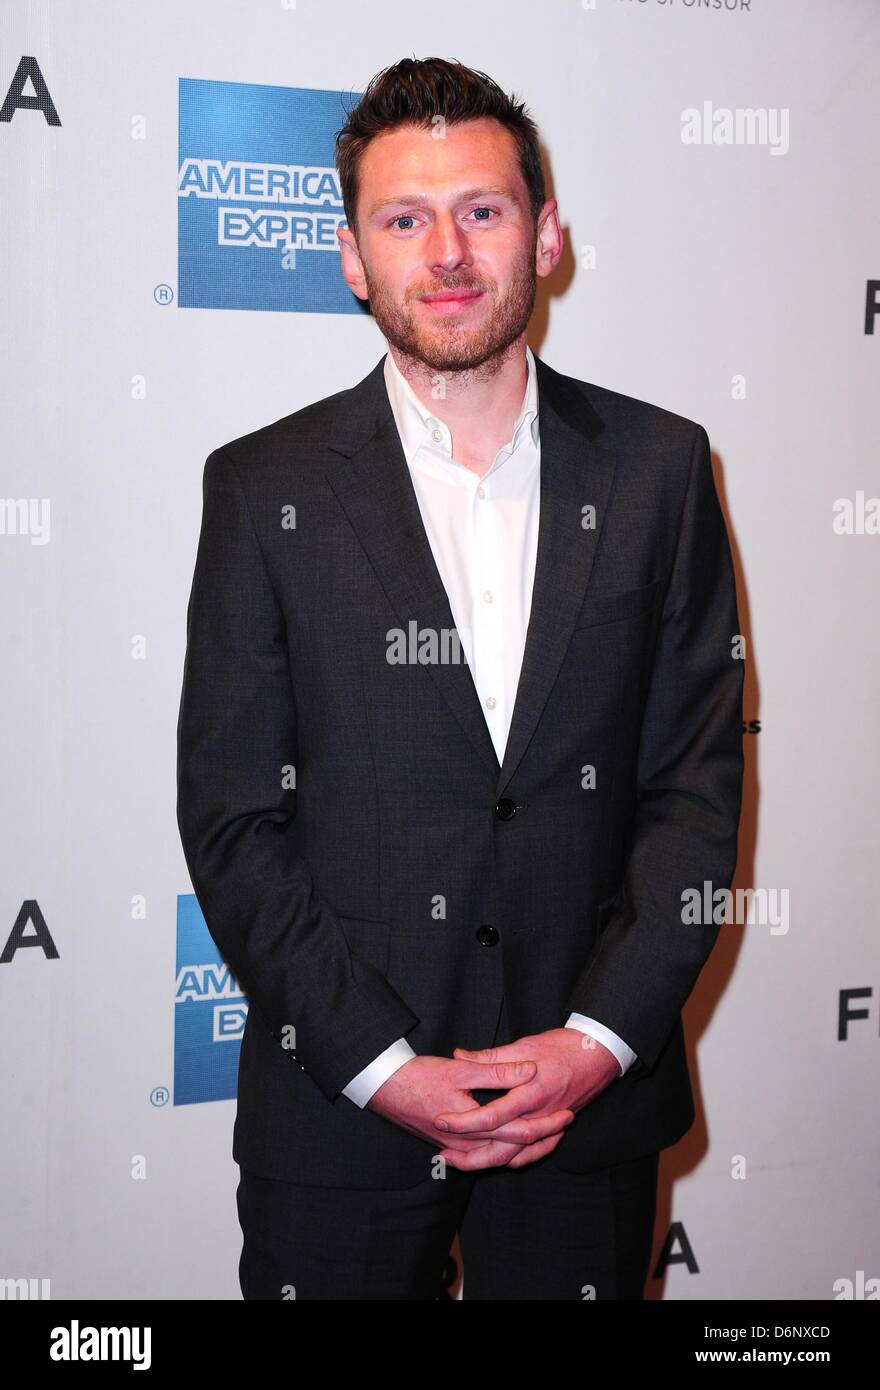 New York, USA. 21st April, 2013. Keir O'Donnell at arrivals for A CASE OF YOU Premiere at Tribeca Film Festival 2013, Tribeca Performing Arts Center (BMCC TPAC), New York, NY April 21, 2013. Photo By: Gregorio T. Binuya/Everett Collection/Alamy Live News Stock Photo